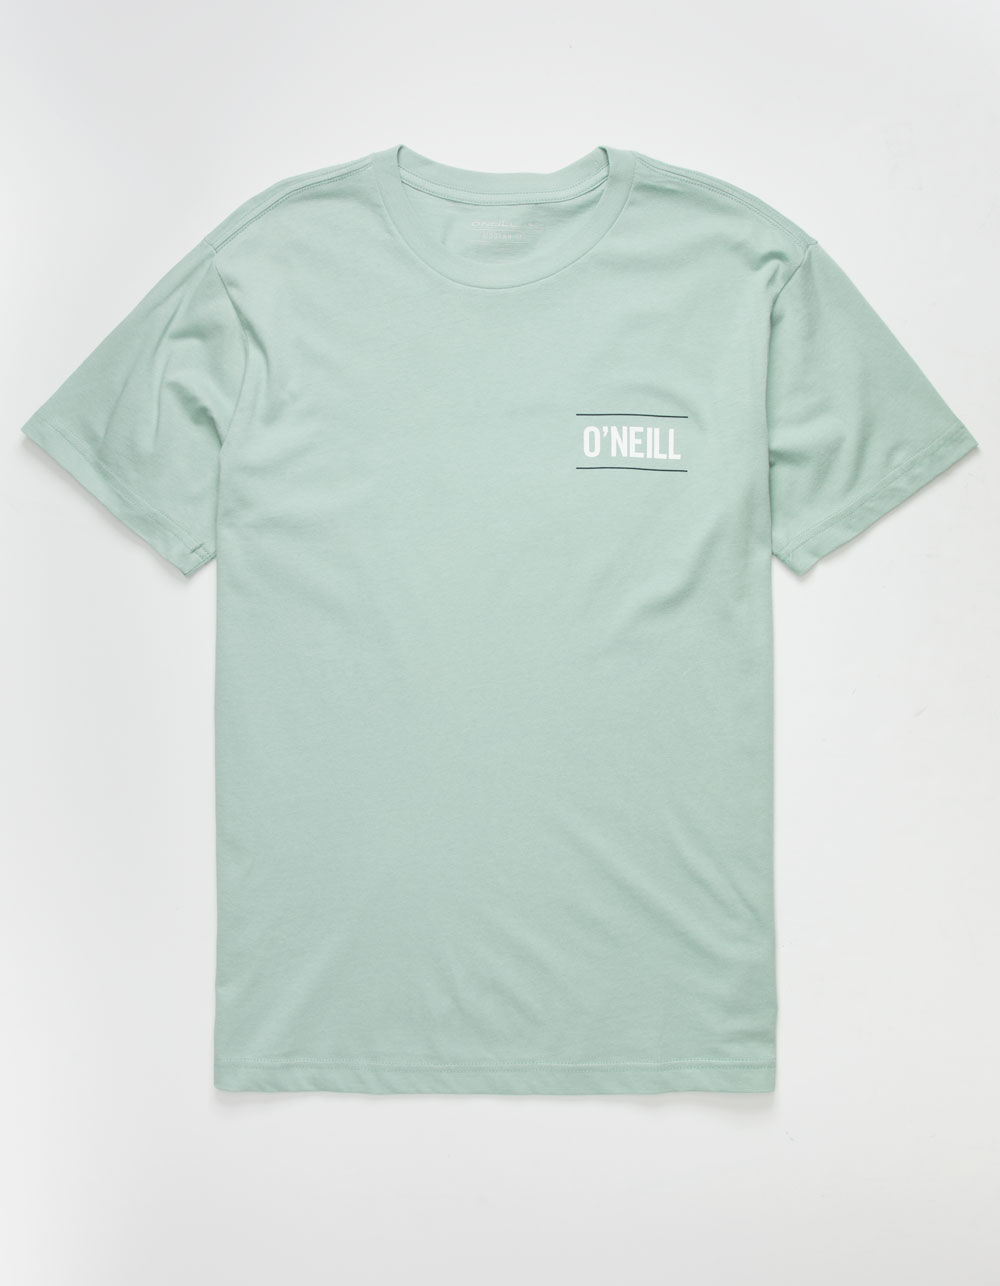 O'NEILL Balinese Mens T-Shirt image number 1